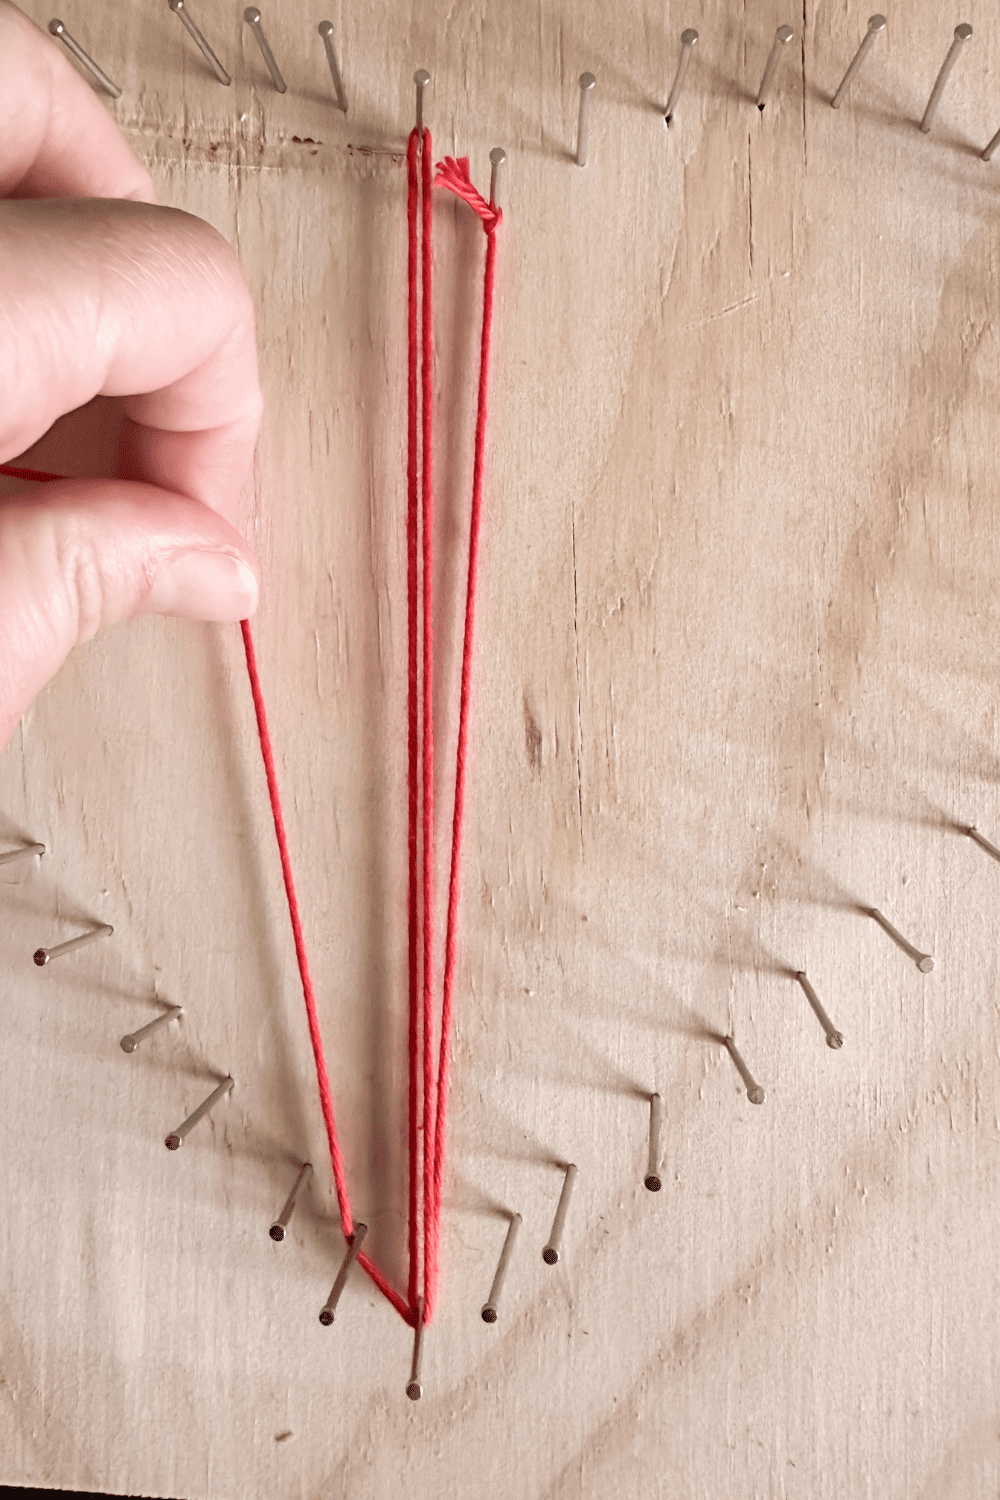 Nails on a piece of wood with string in between in red. Hand showing how to tie the strings.